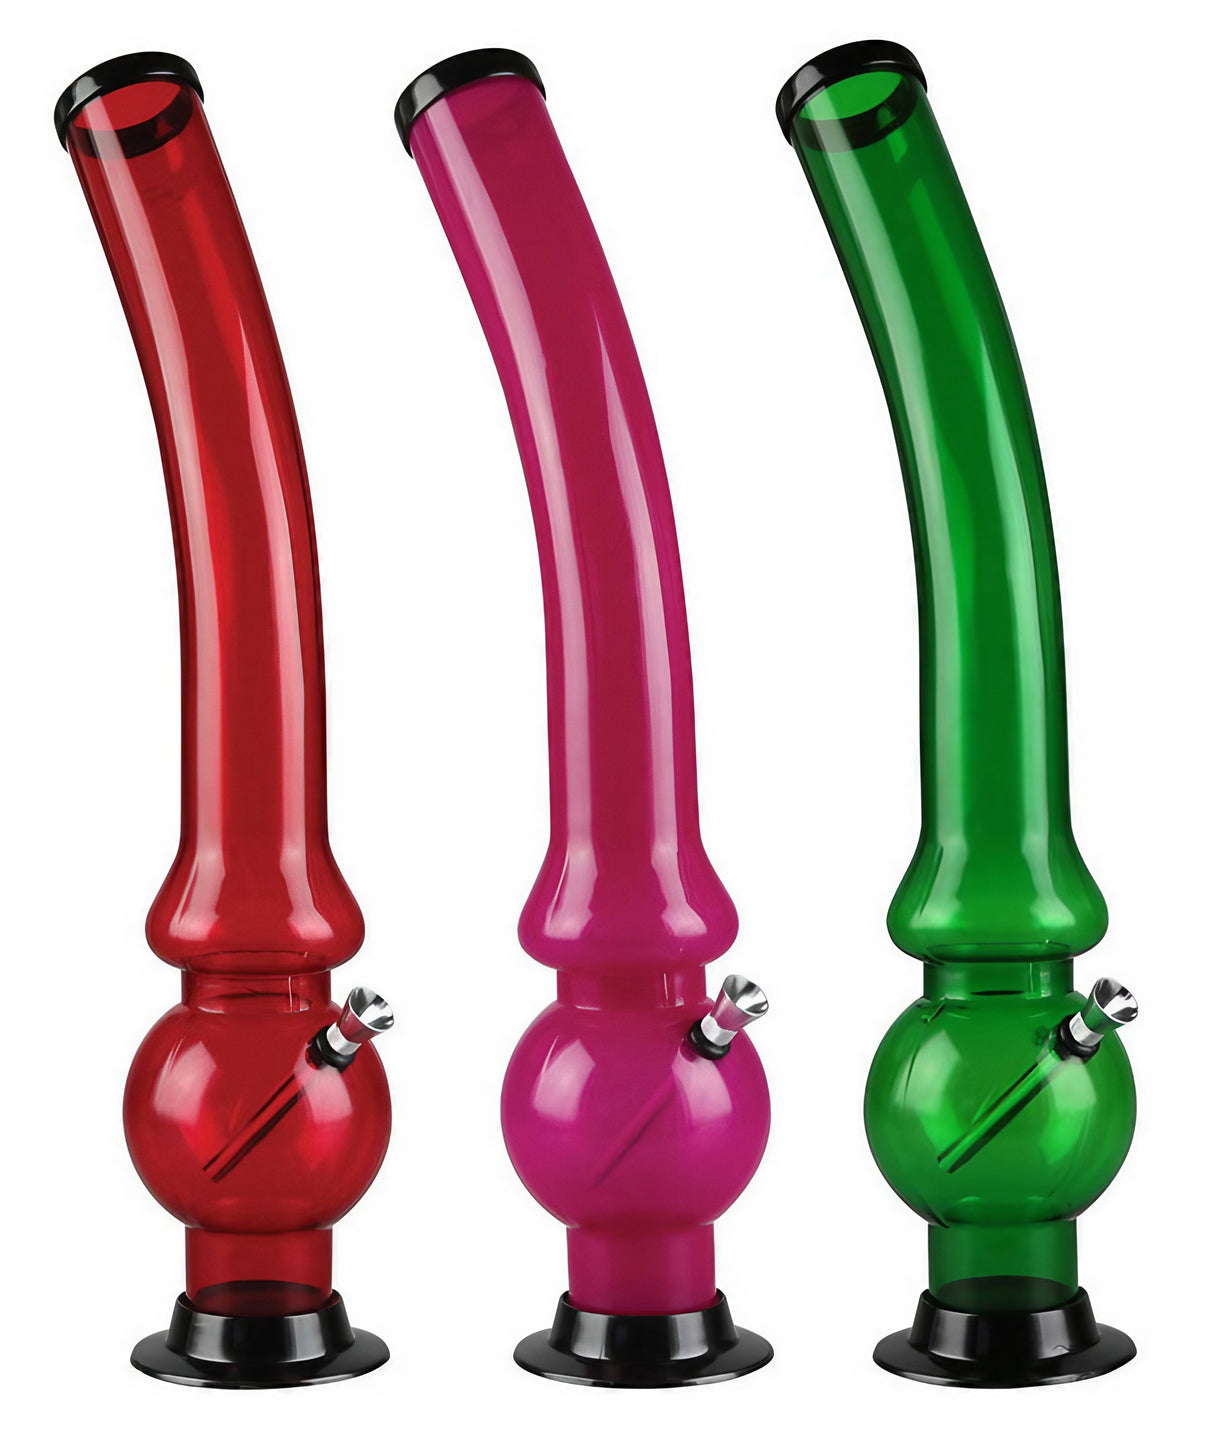 Trio of Acrylic Curved Neck Bongs with Bubble Base in Red, Pink, Green - 18" Tall